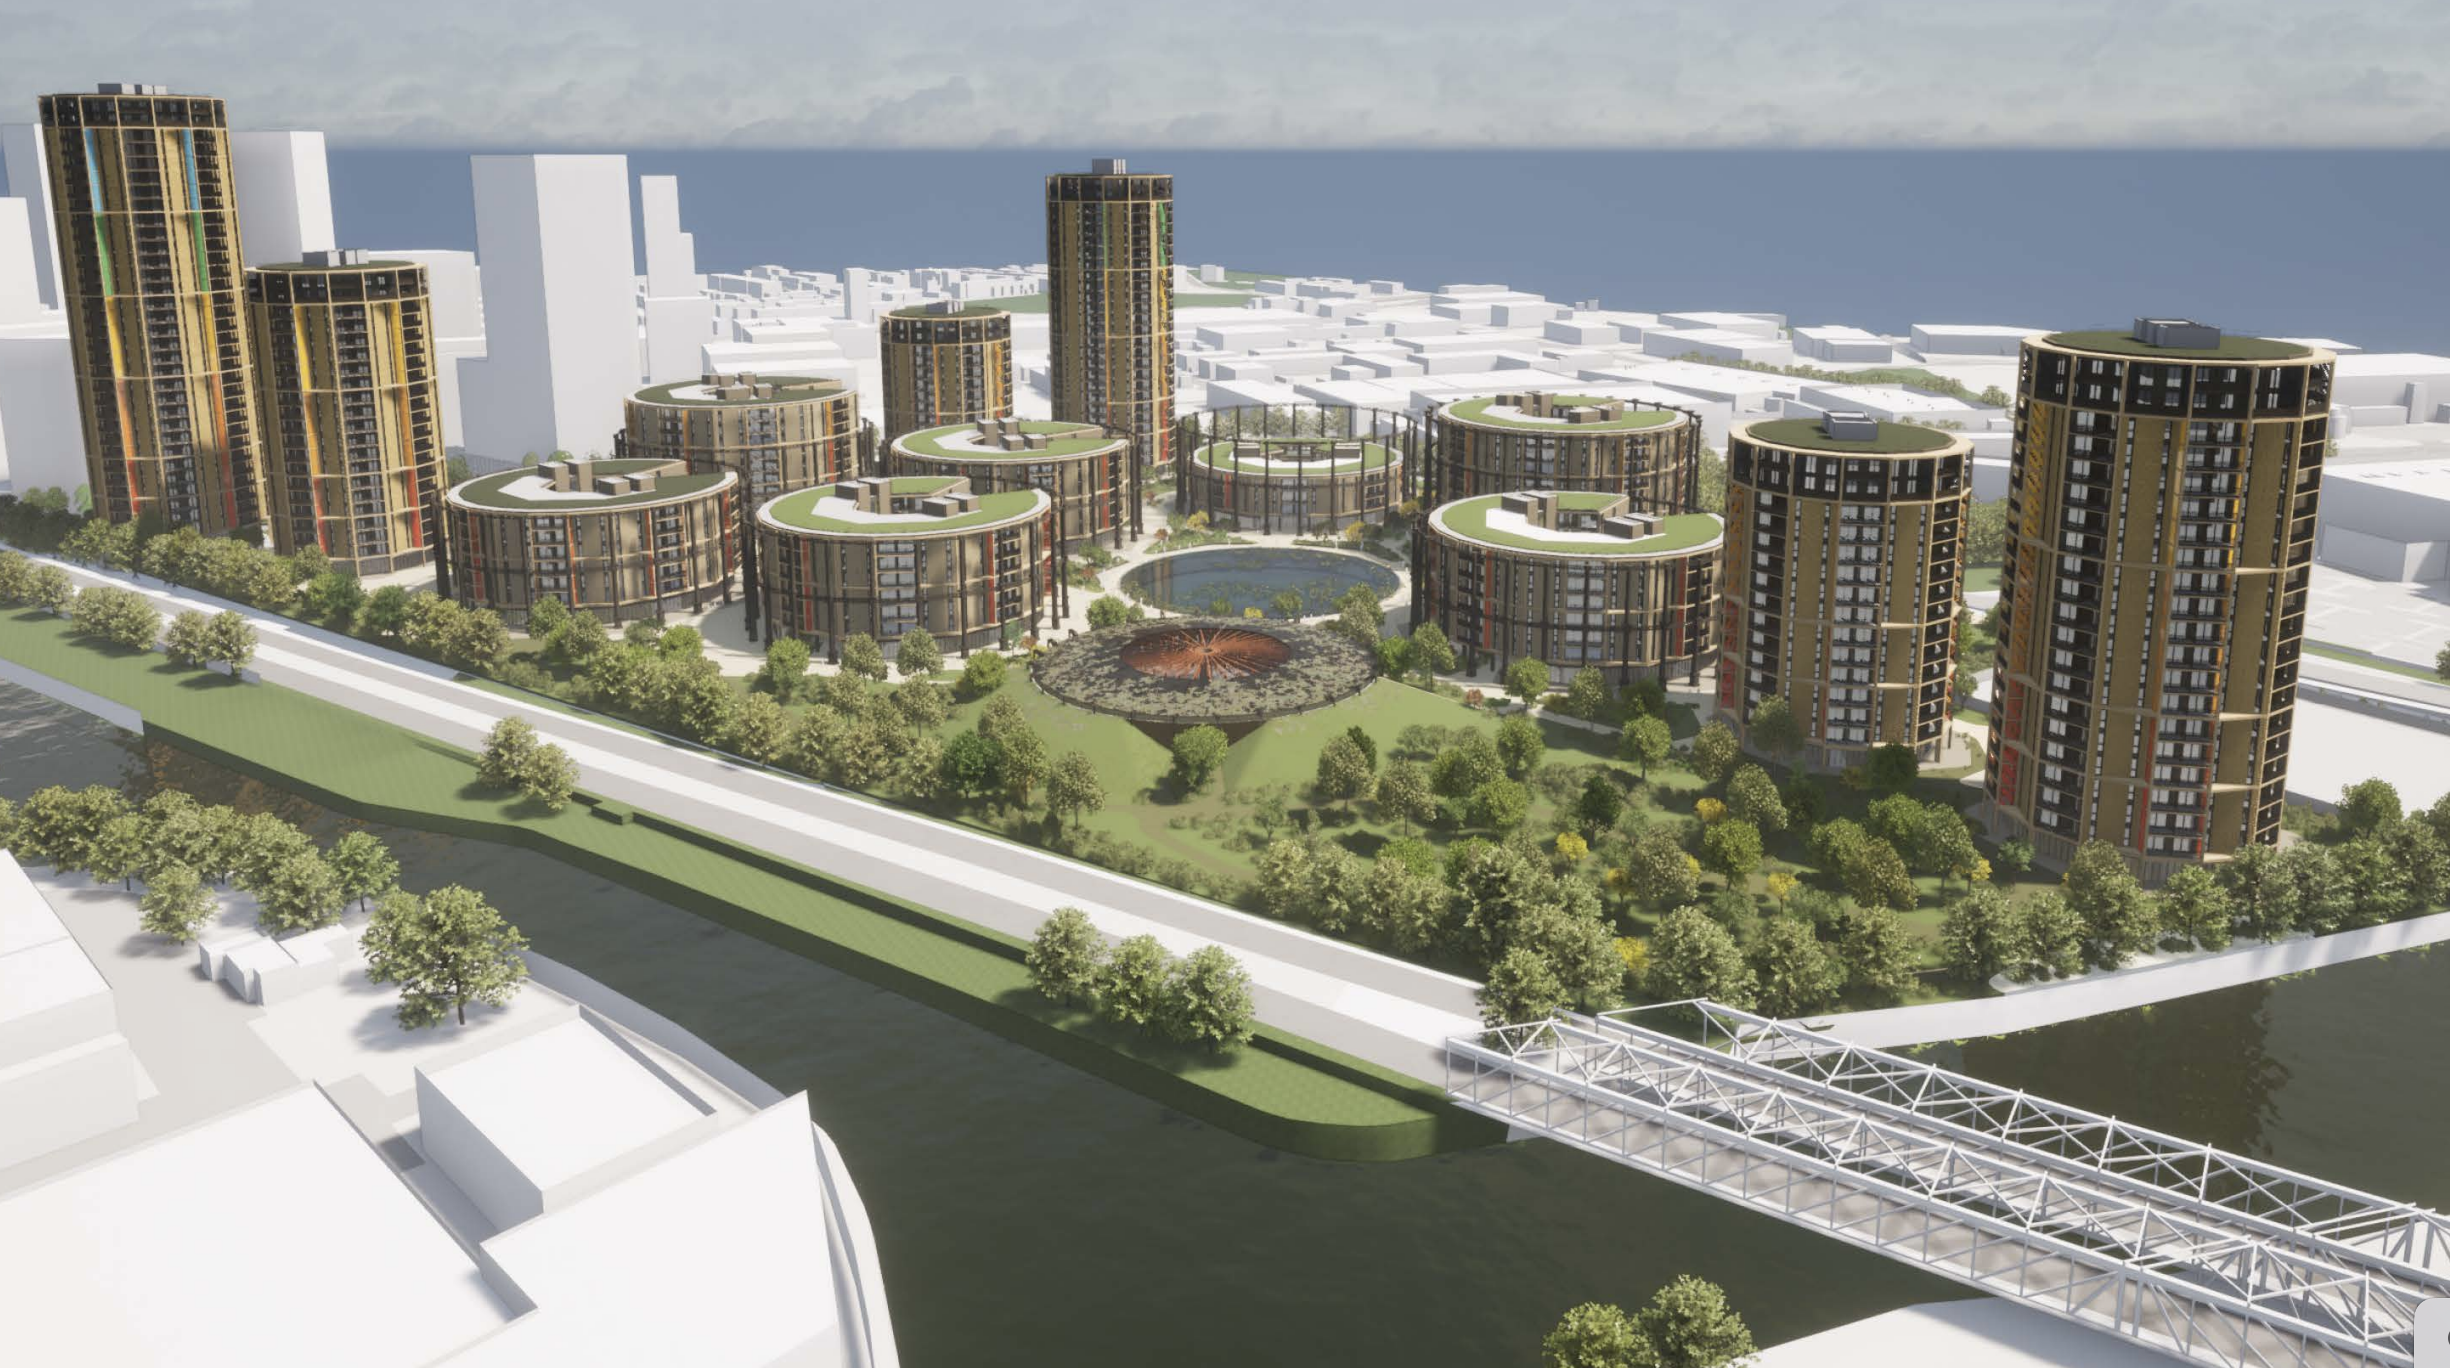 2,100 homes plan for UK’s largest cluster of Victorian gasholders